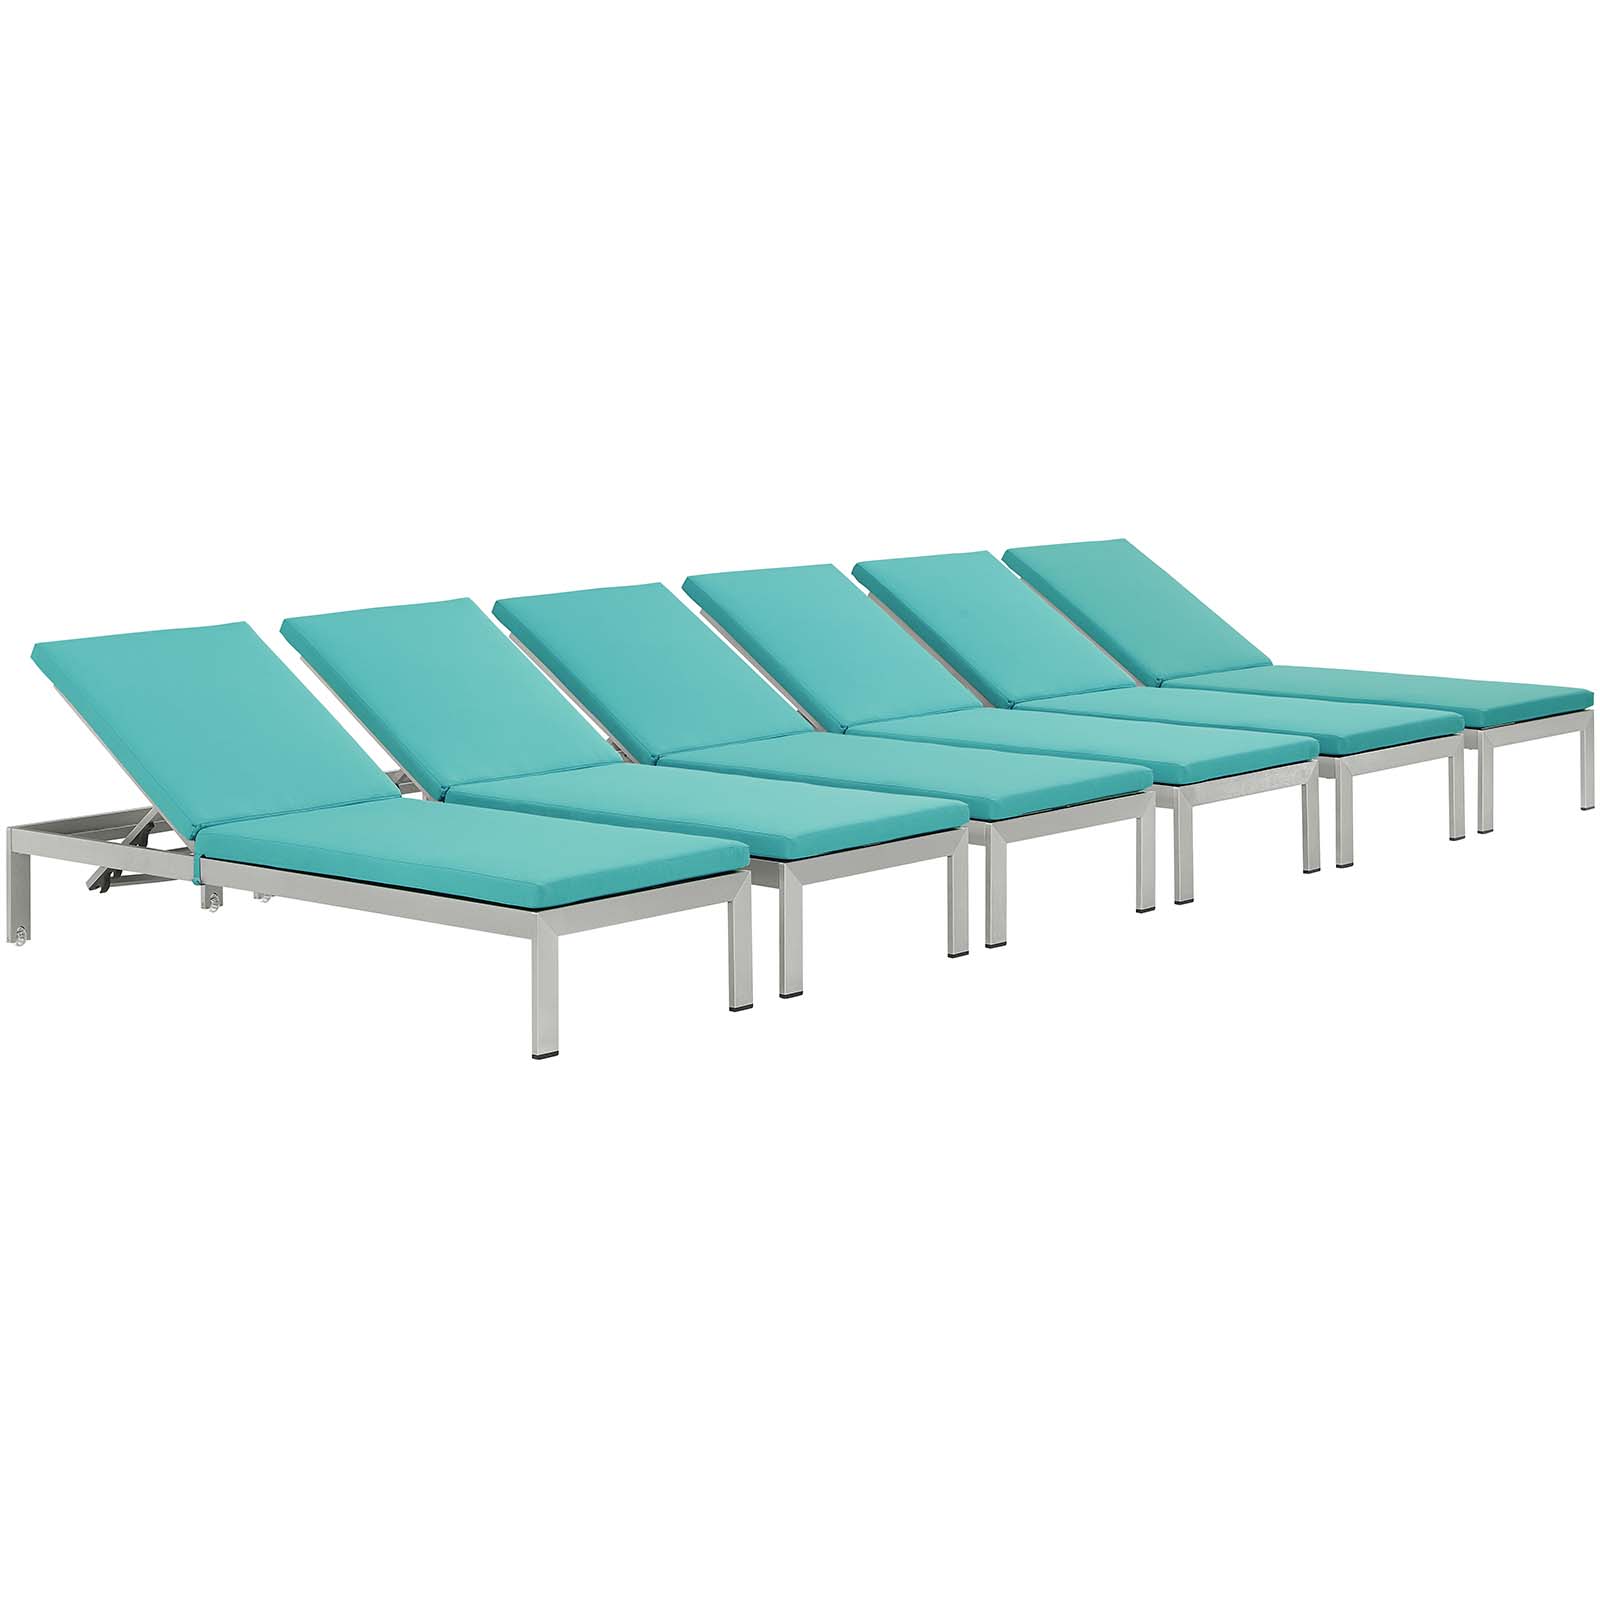 Modern Contemporary Urban Design Outdoor Patio Balcony Chaise Lounge Chair ( Set of 6), Blue, Aluminum - image 1 of 6